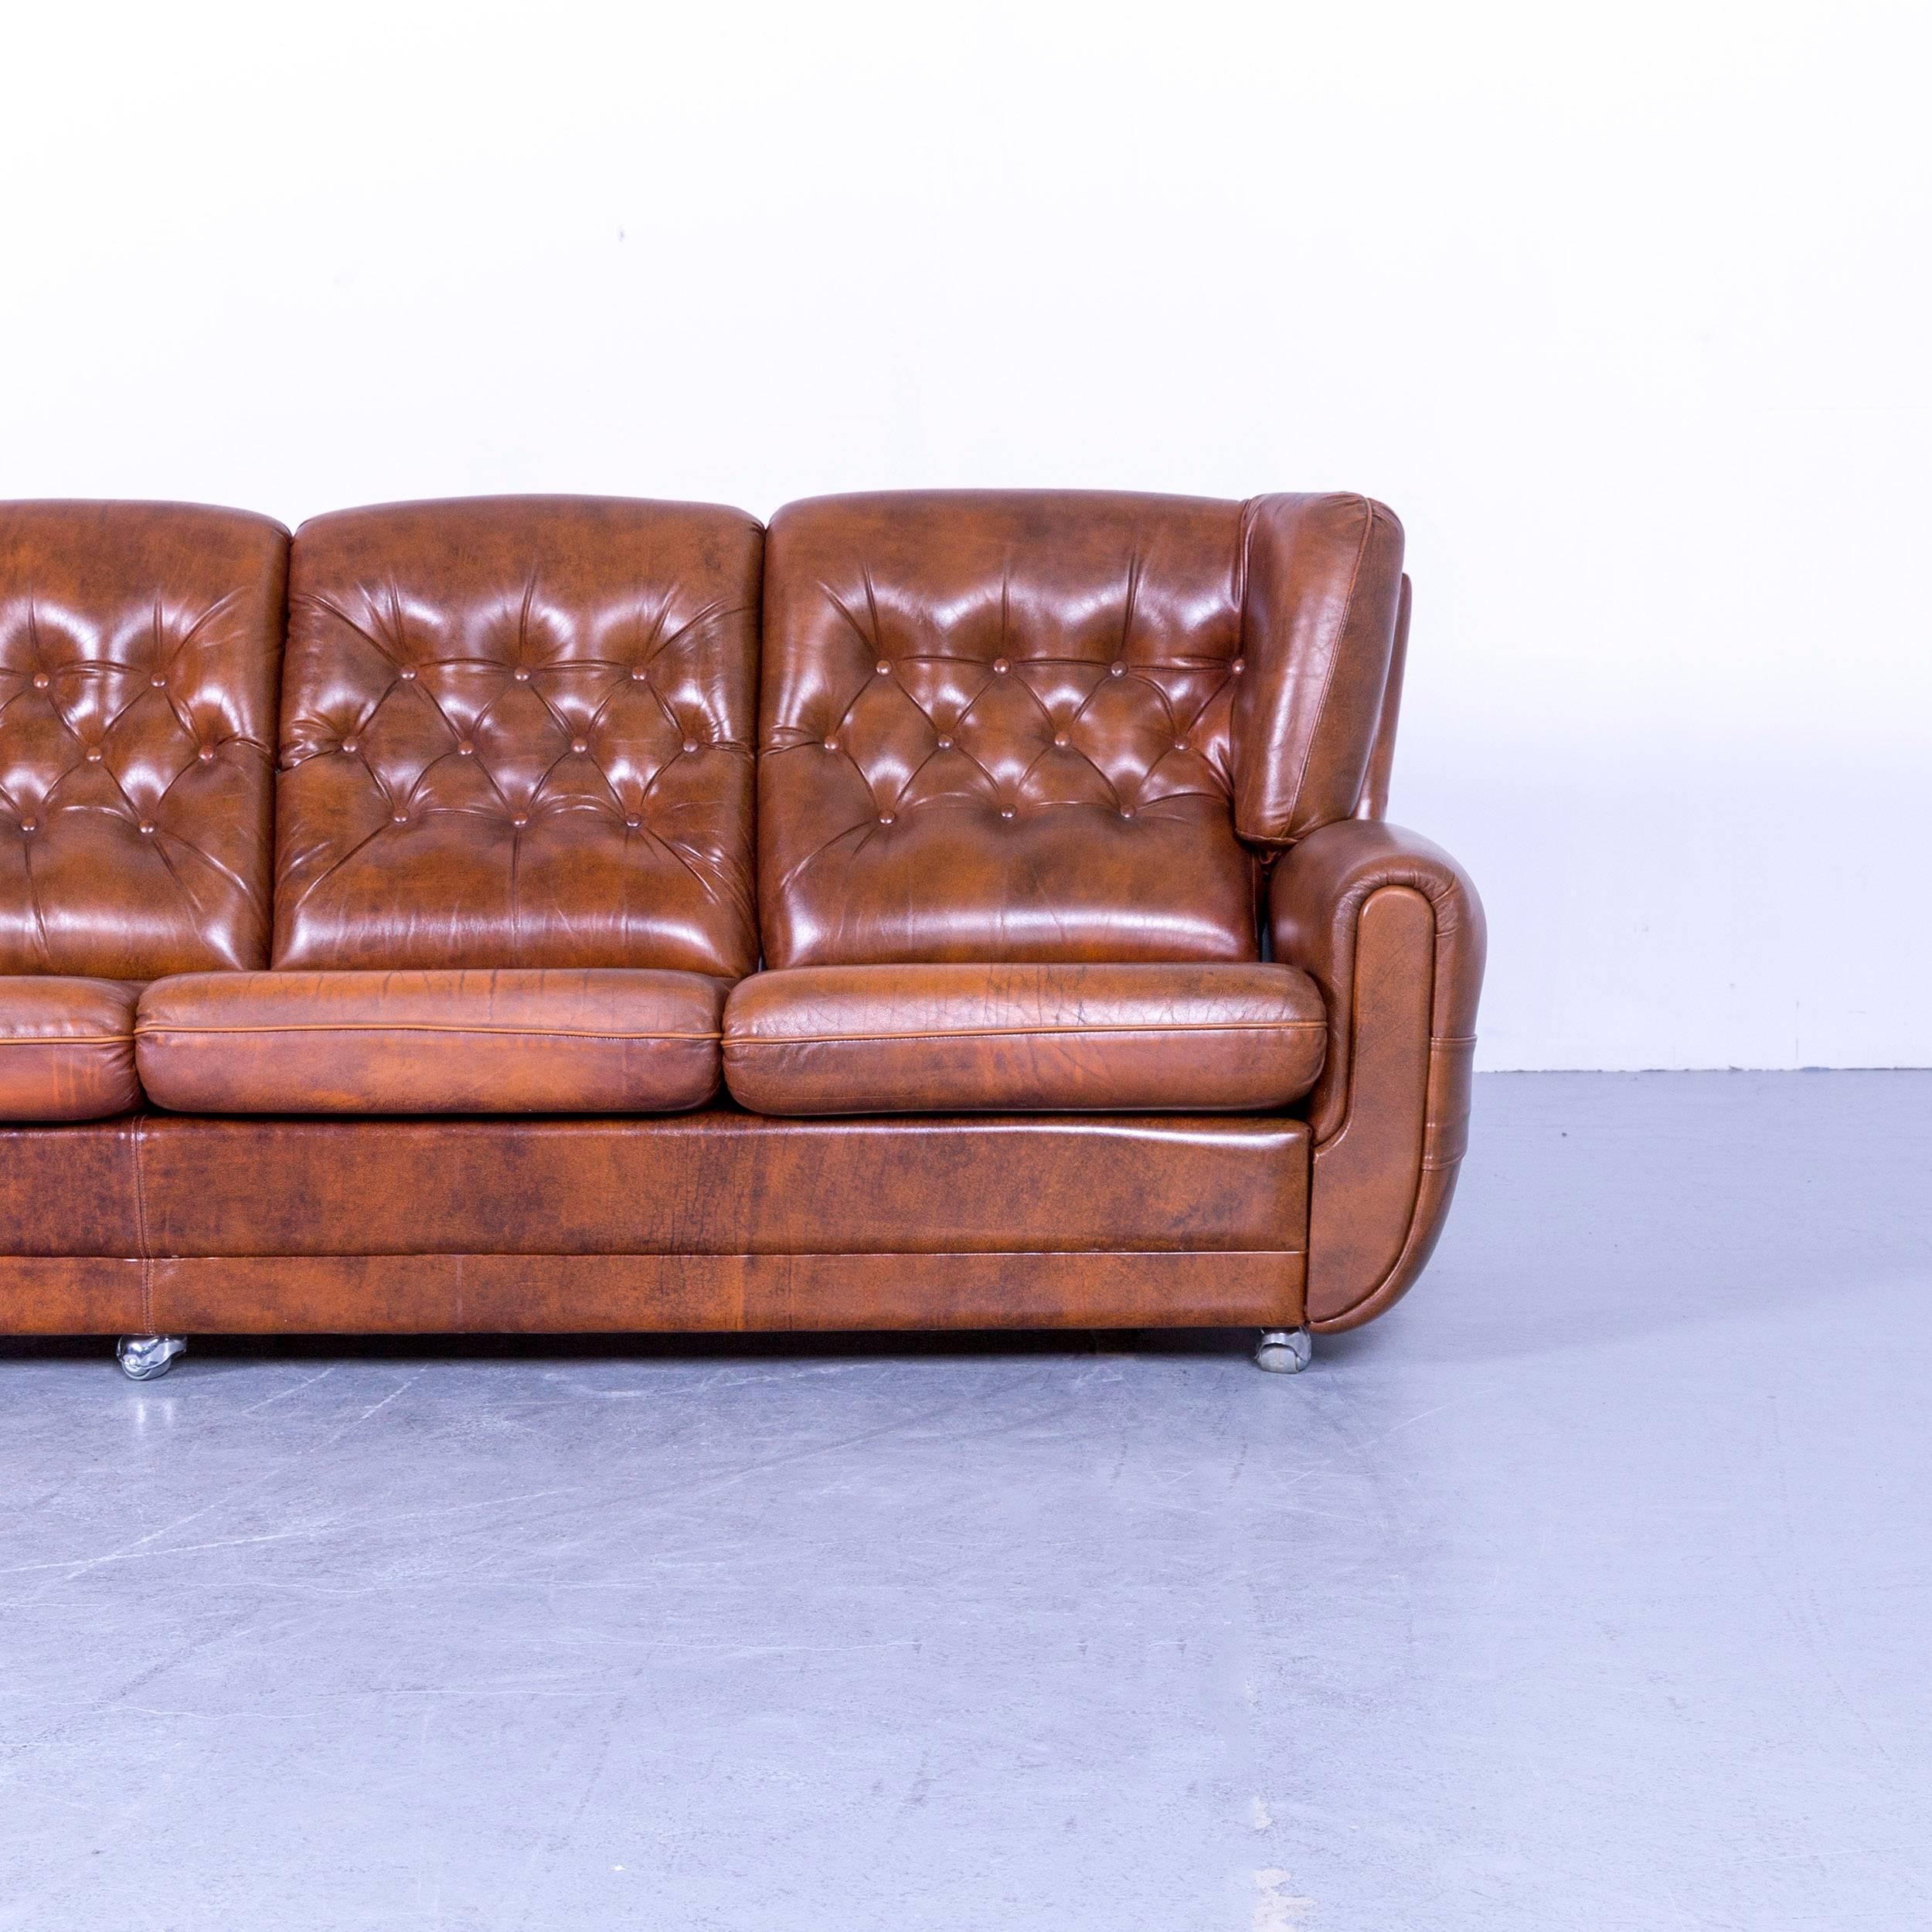 Contemporary Chesterfield Leather Sofa Set Brown Four Seater 2x Armchair